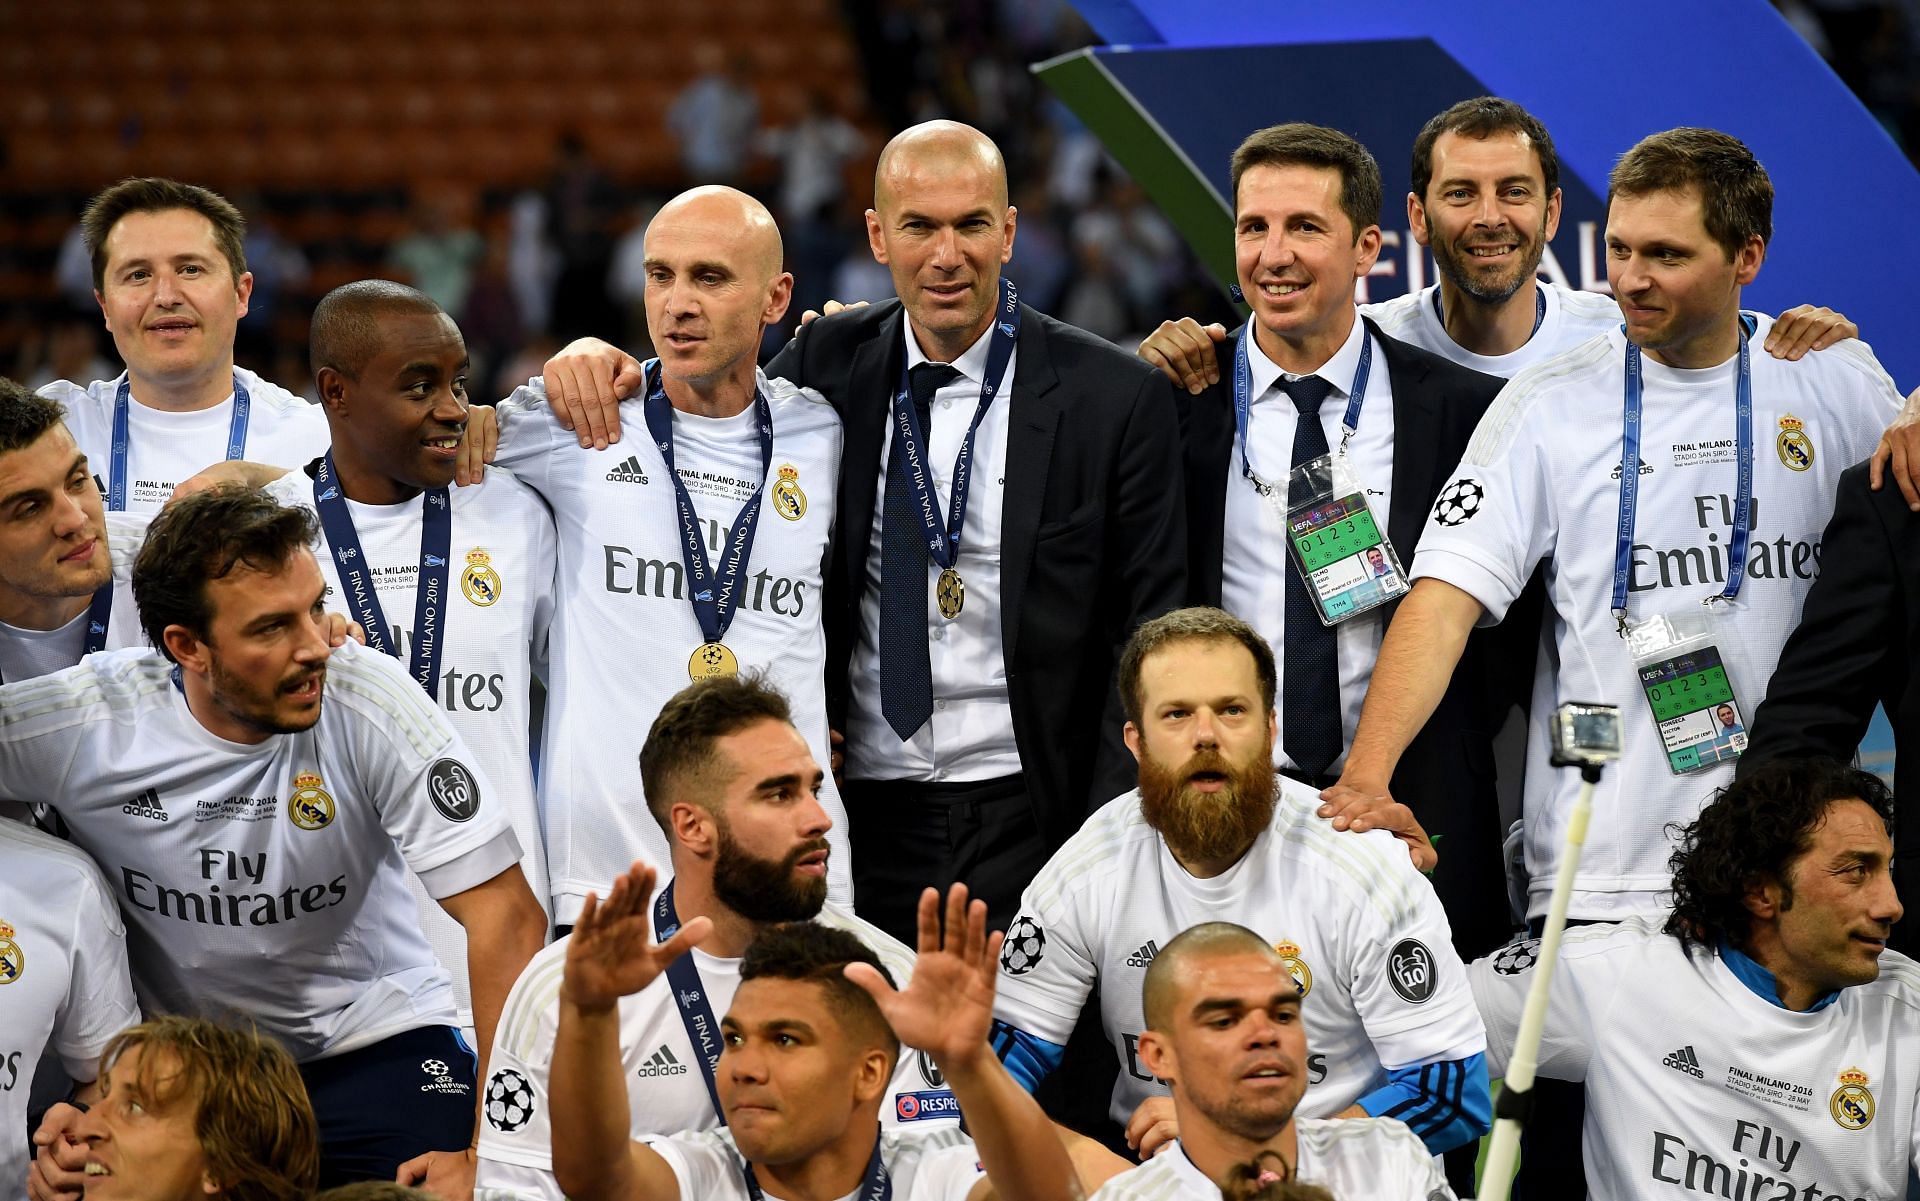 There has been no team more dominant than Real Madrid in Europe